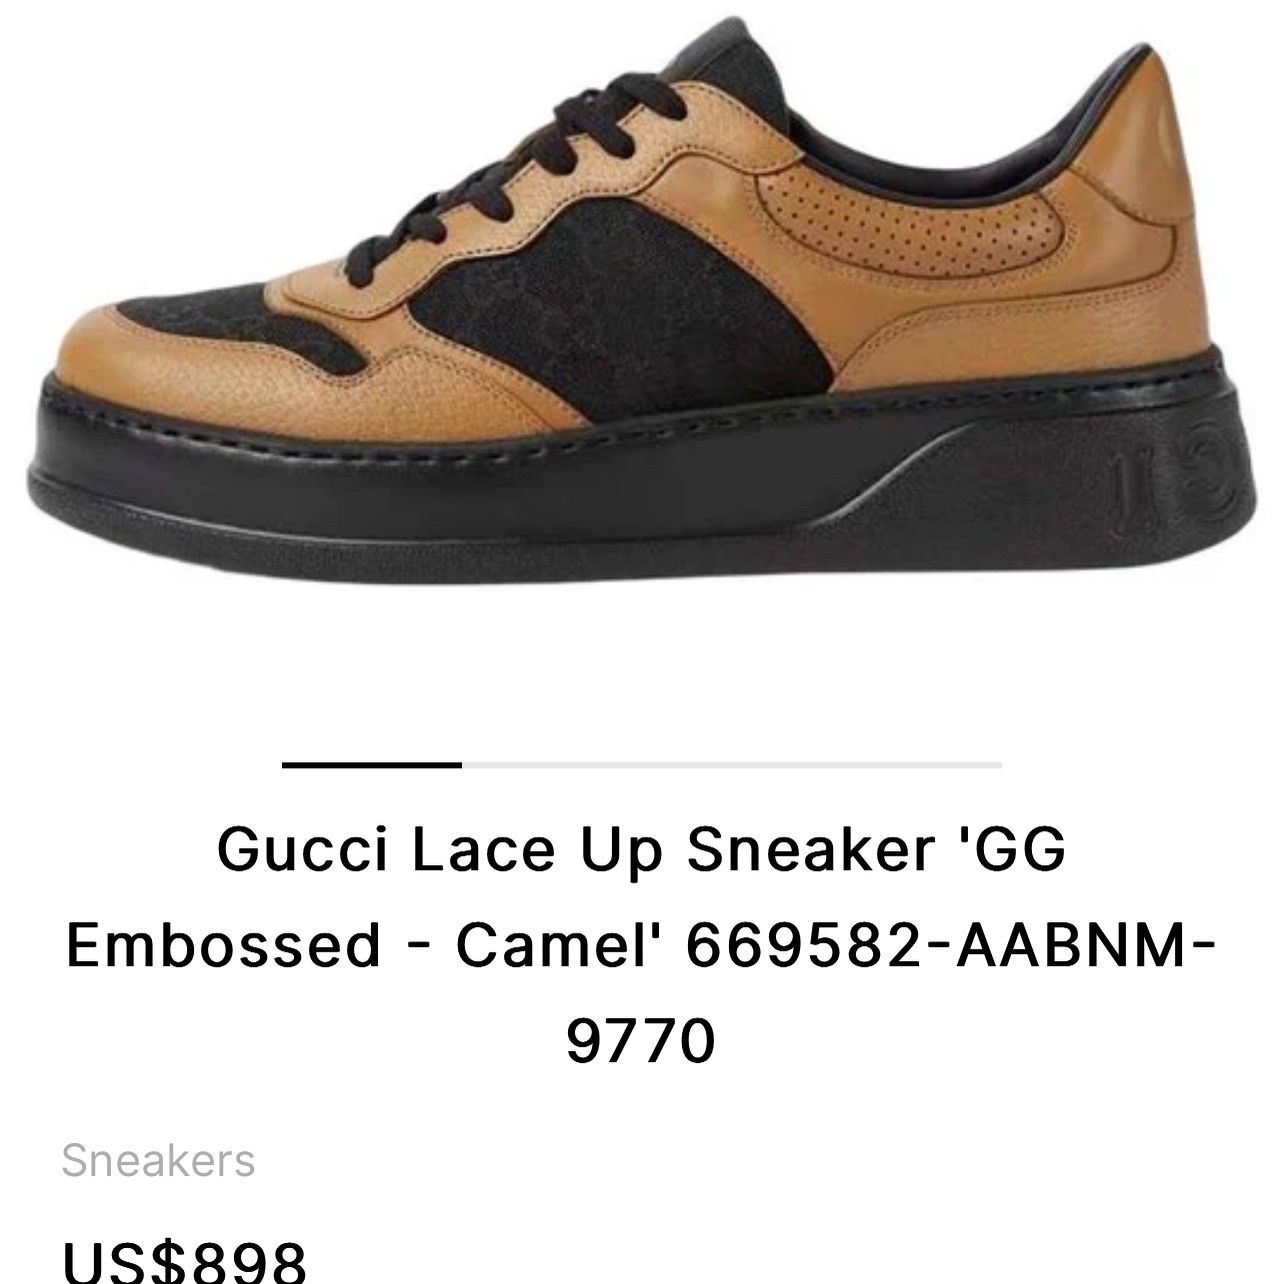 Gucci Lace Up Sneaker 'GG Embossed - Camel' 669582-AABNM- 9770